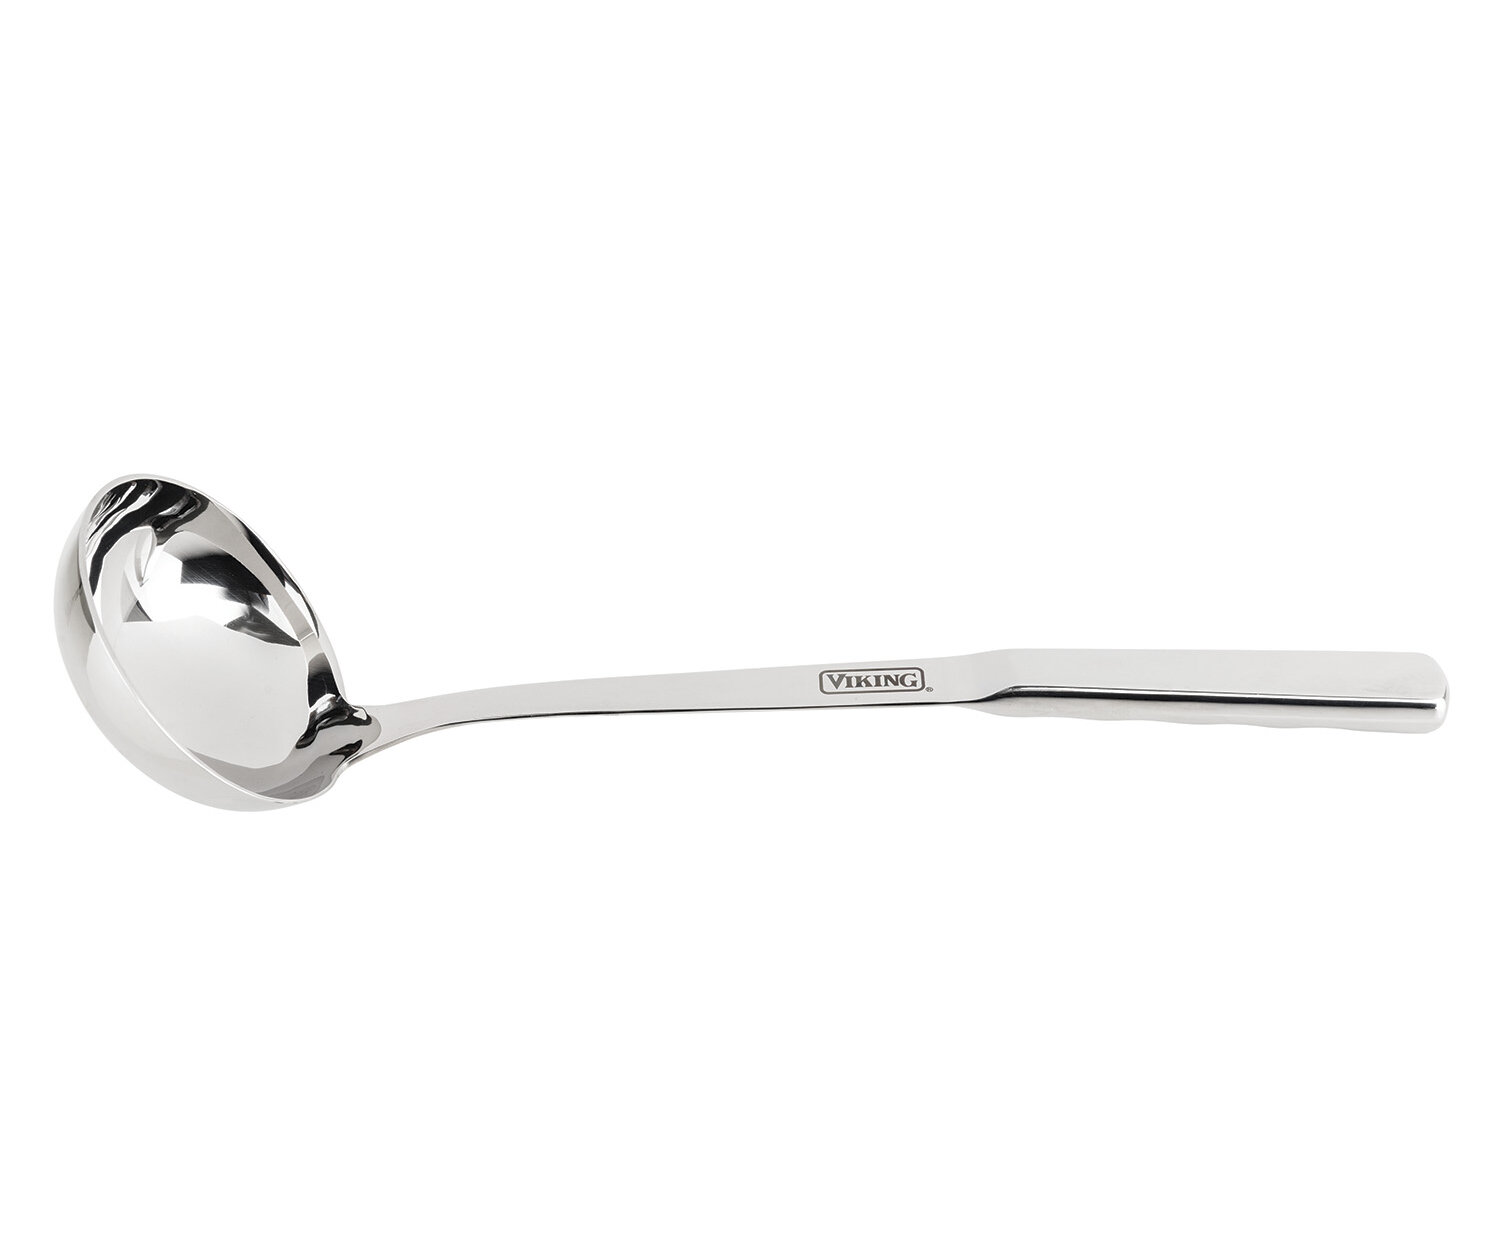 12 Inch Stainless Steel Ladle with Comfortable Grip Online